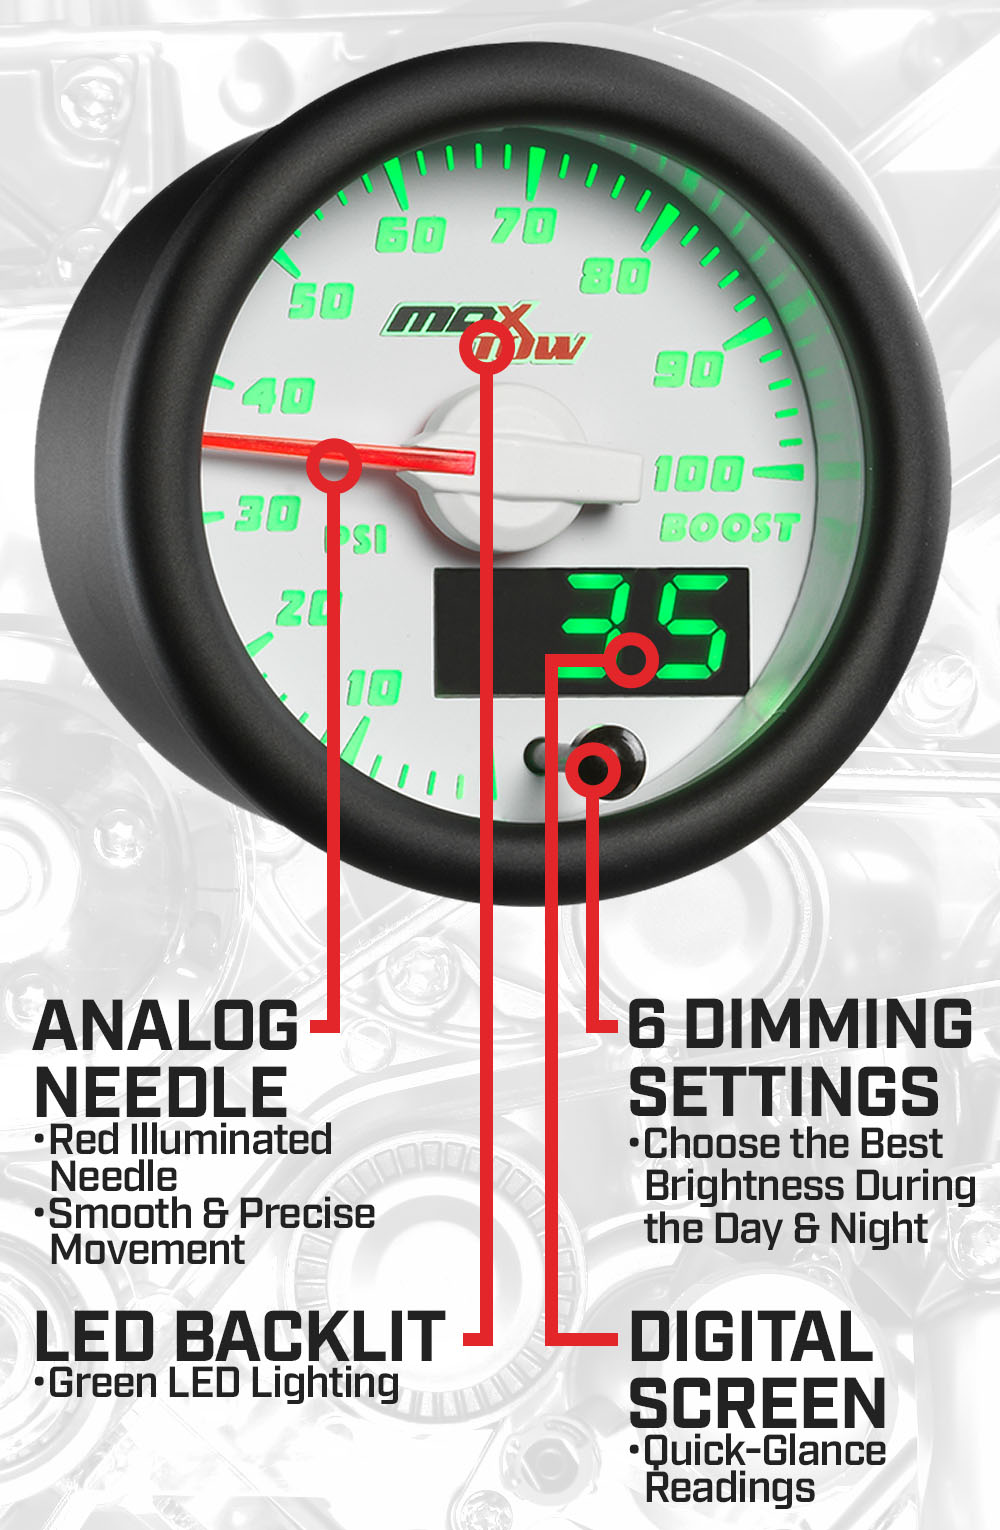 White & Green Double Vision 100 PSI Boost Gauge Features